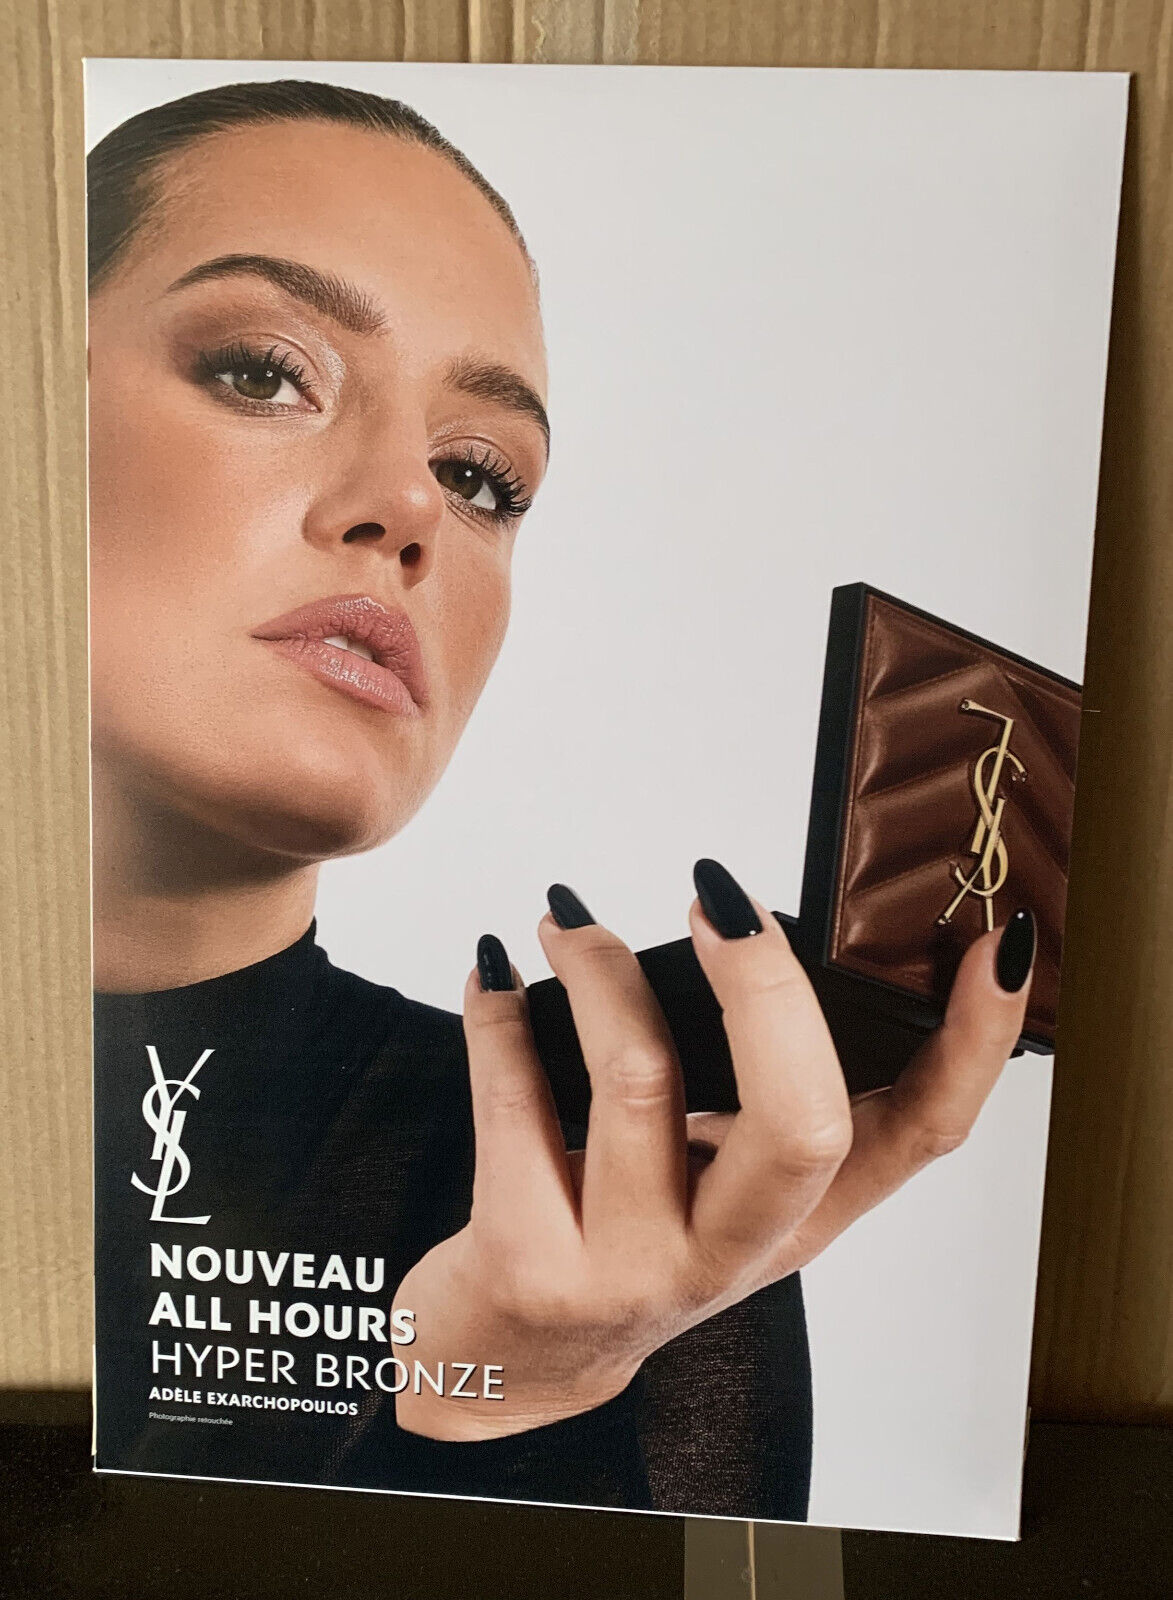 PLV double-sided cardboard, Yves Saint Laurent YSL, face Adele Exarchopoulos